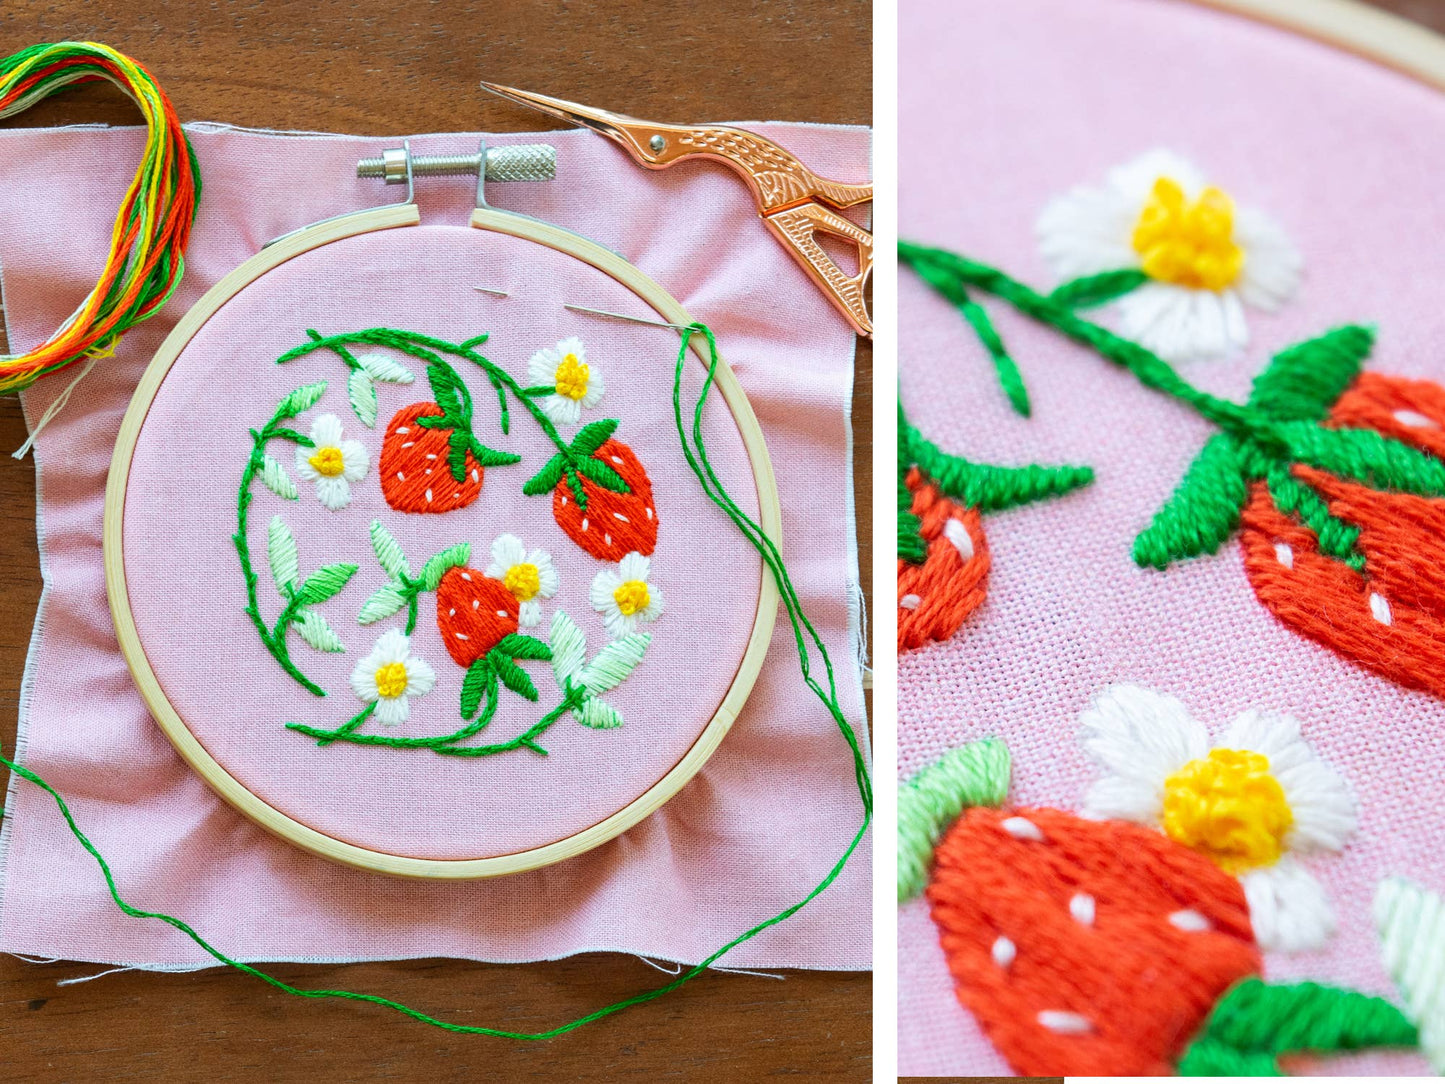 Holiday Decor:  Strawberries DIY Embroidered Ornament Kit